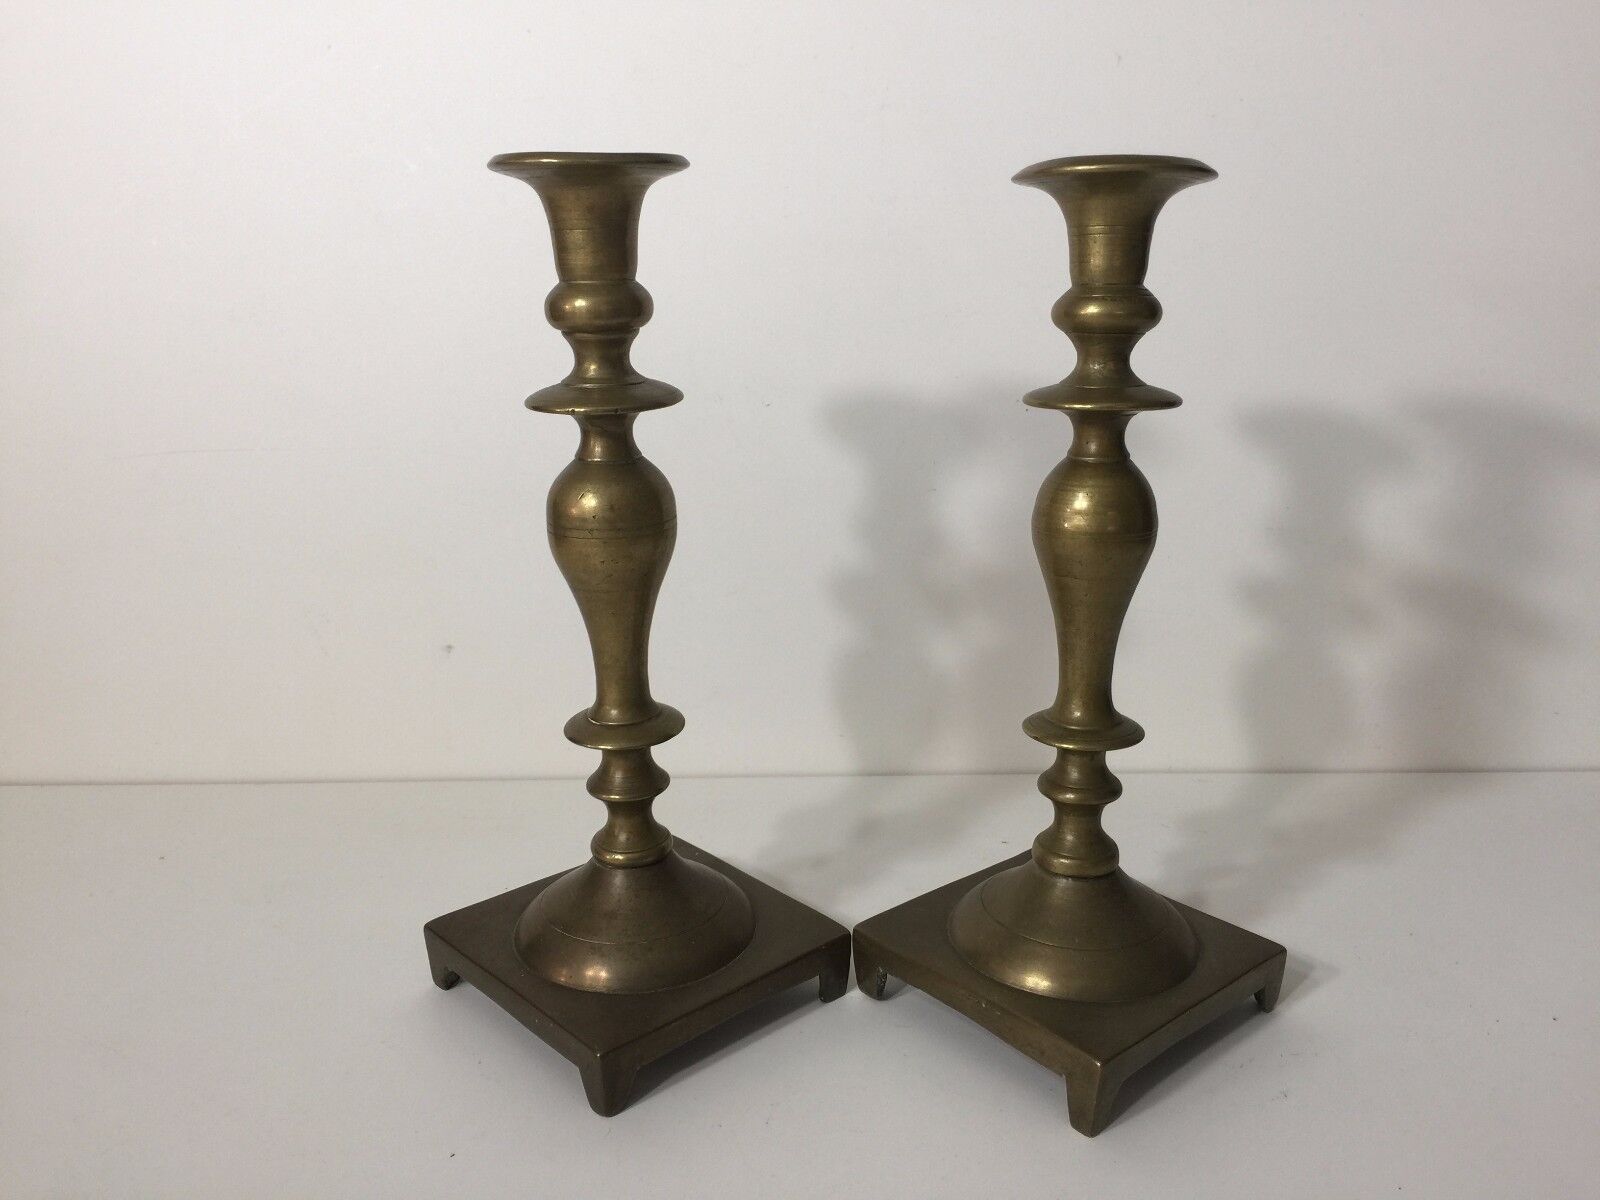 Pair of Antique Late 17th or early 18th Spanish Heavy Brass Candlesticks Holders